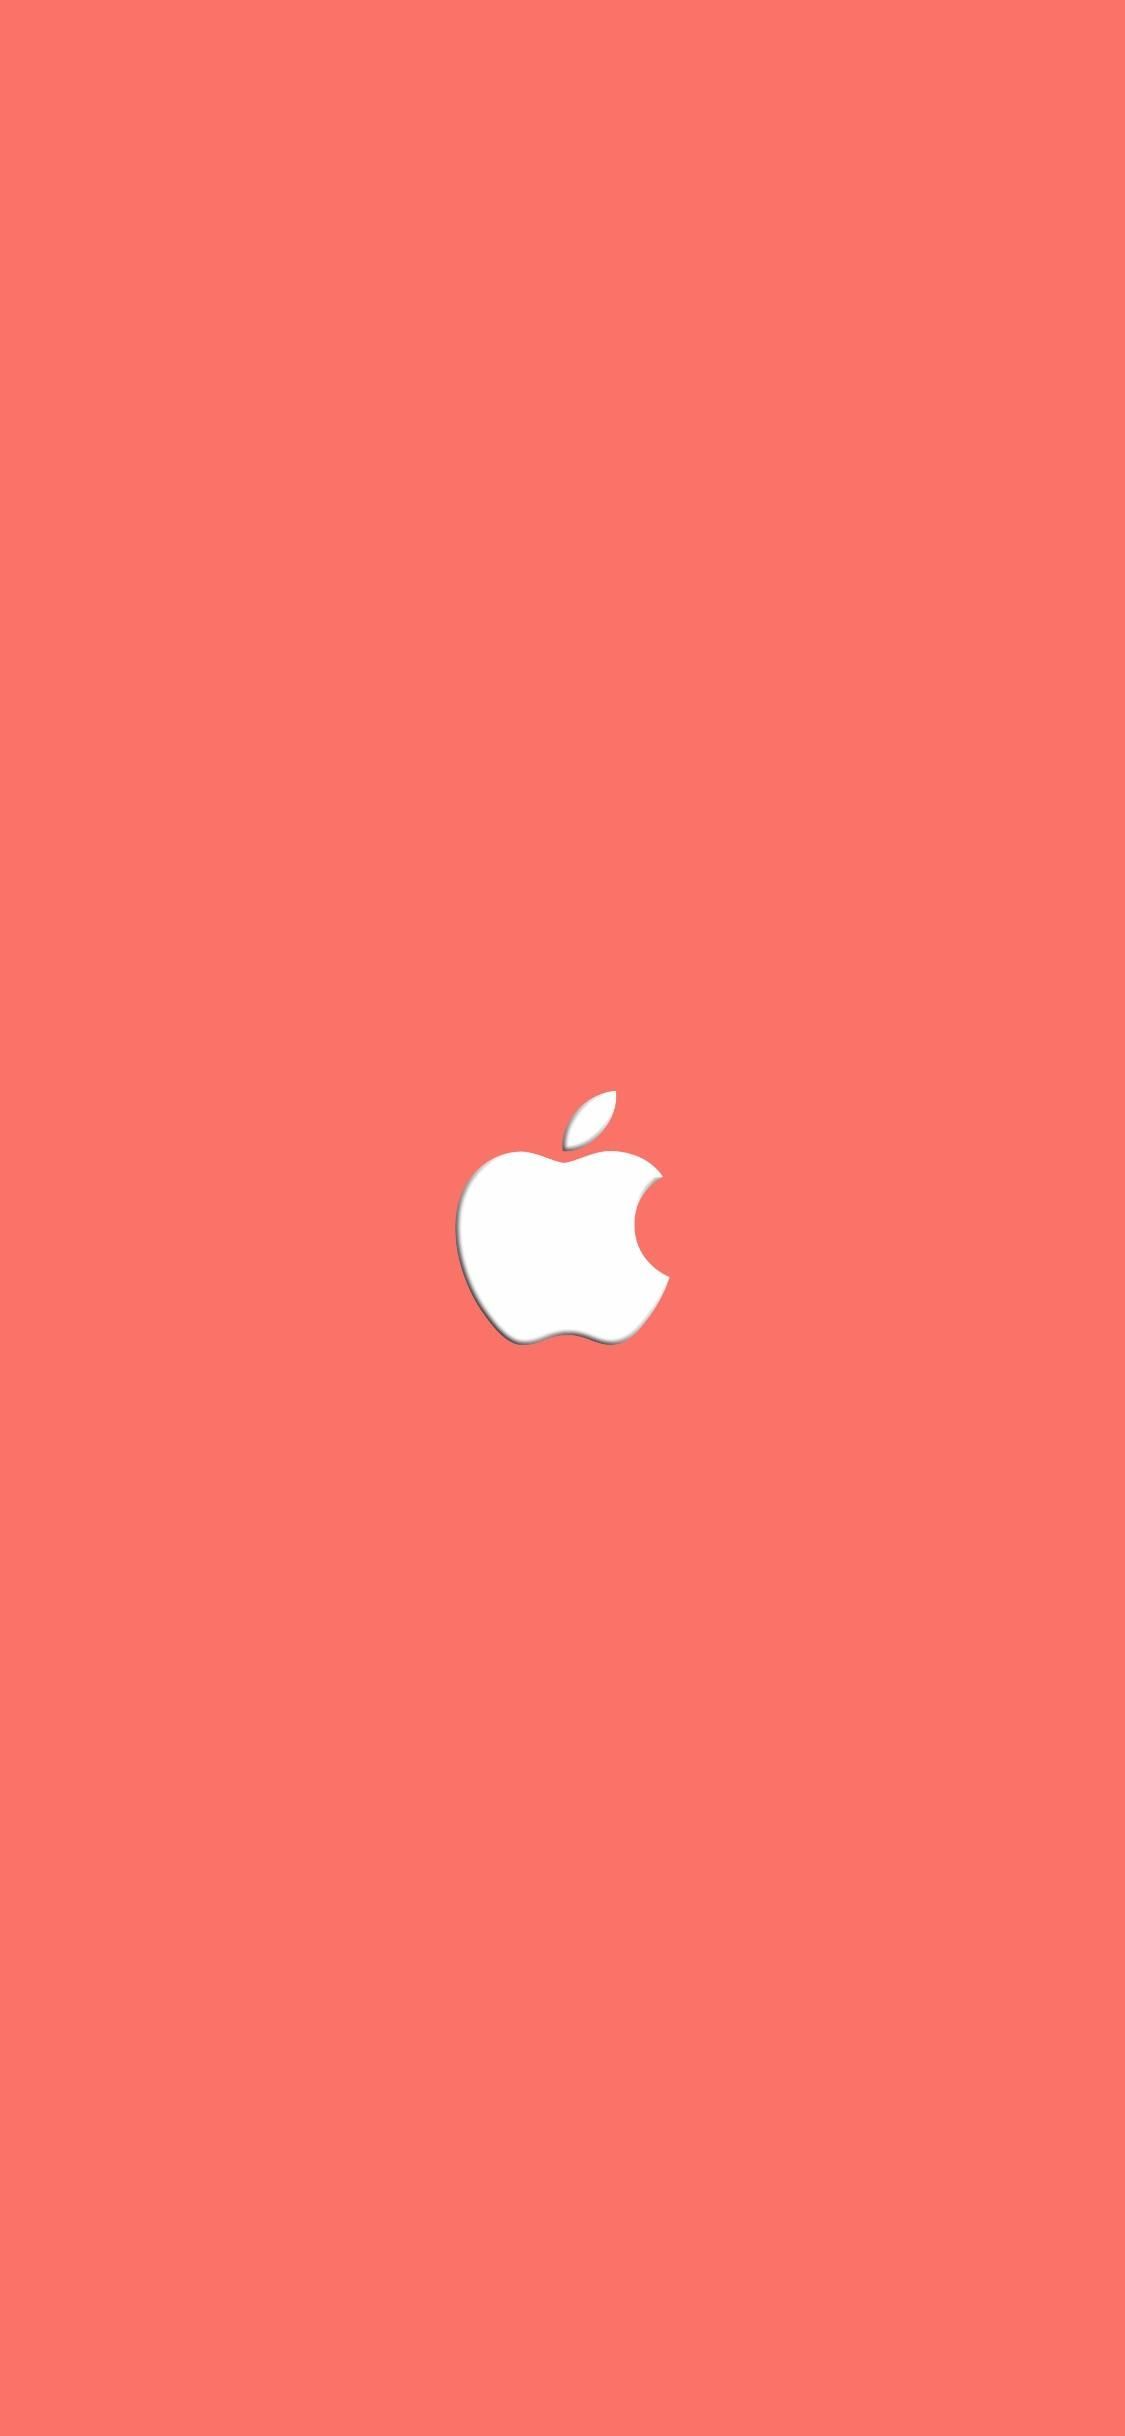 A close up of an apple logo on pink background - Coral